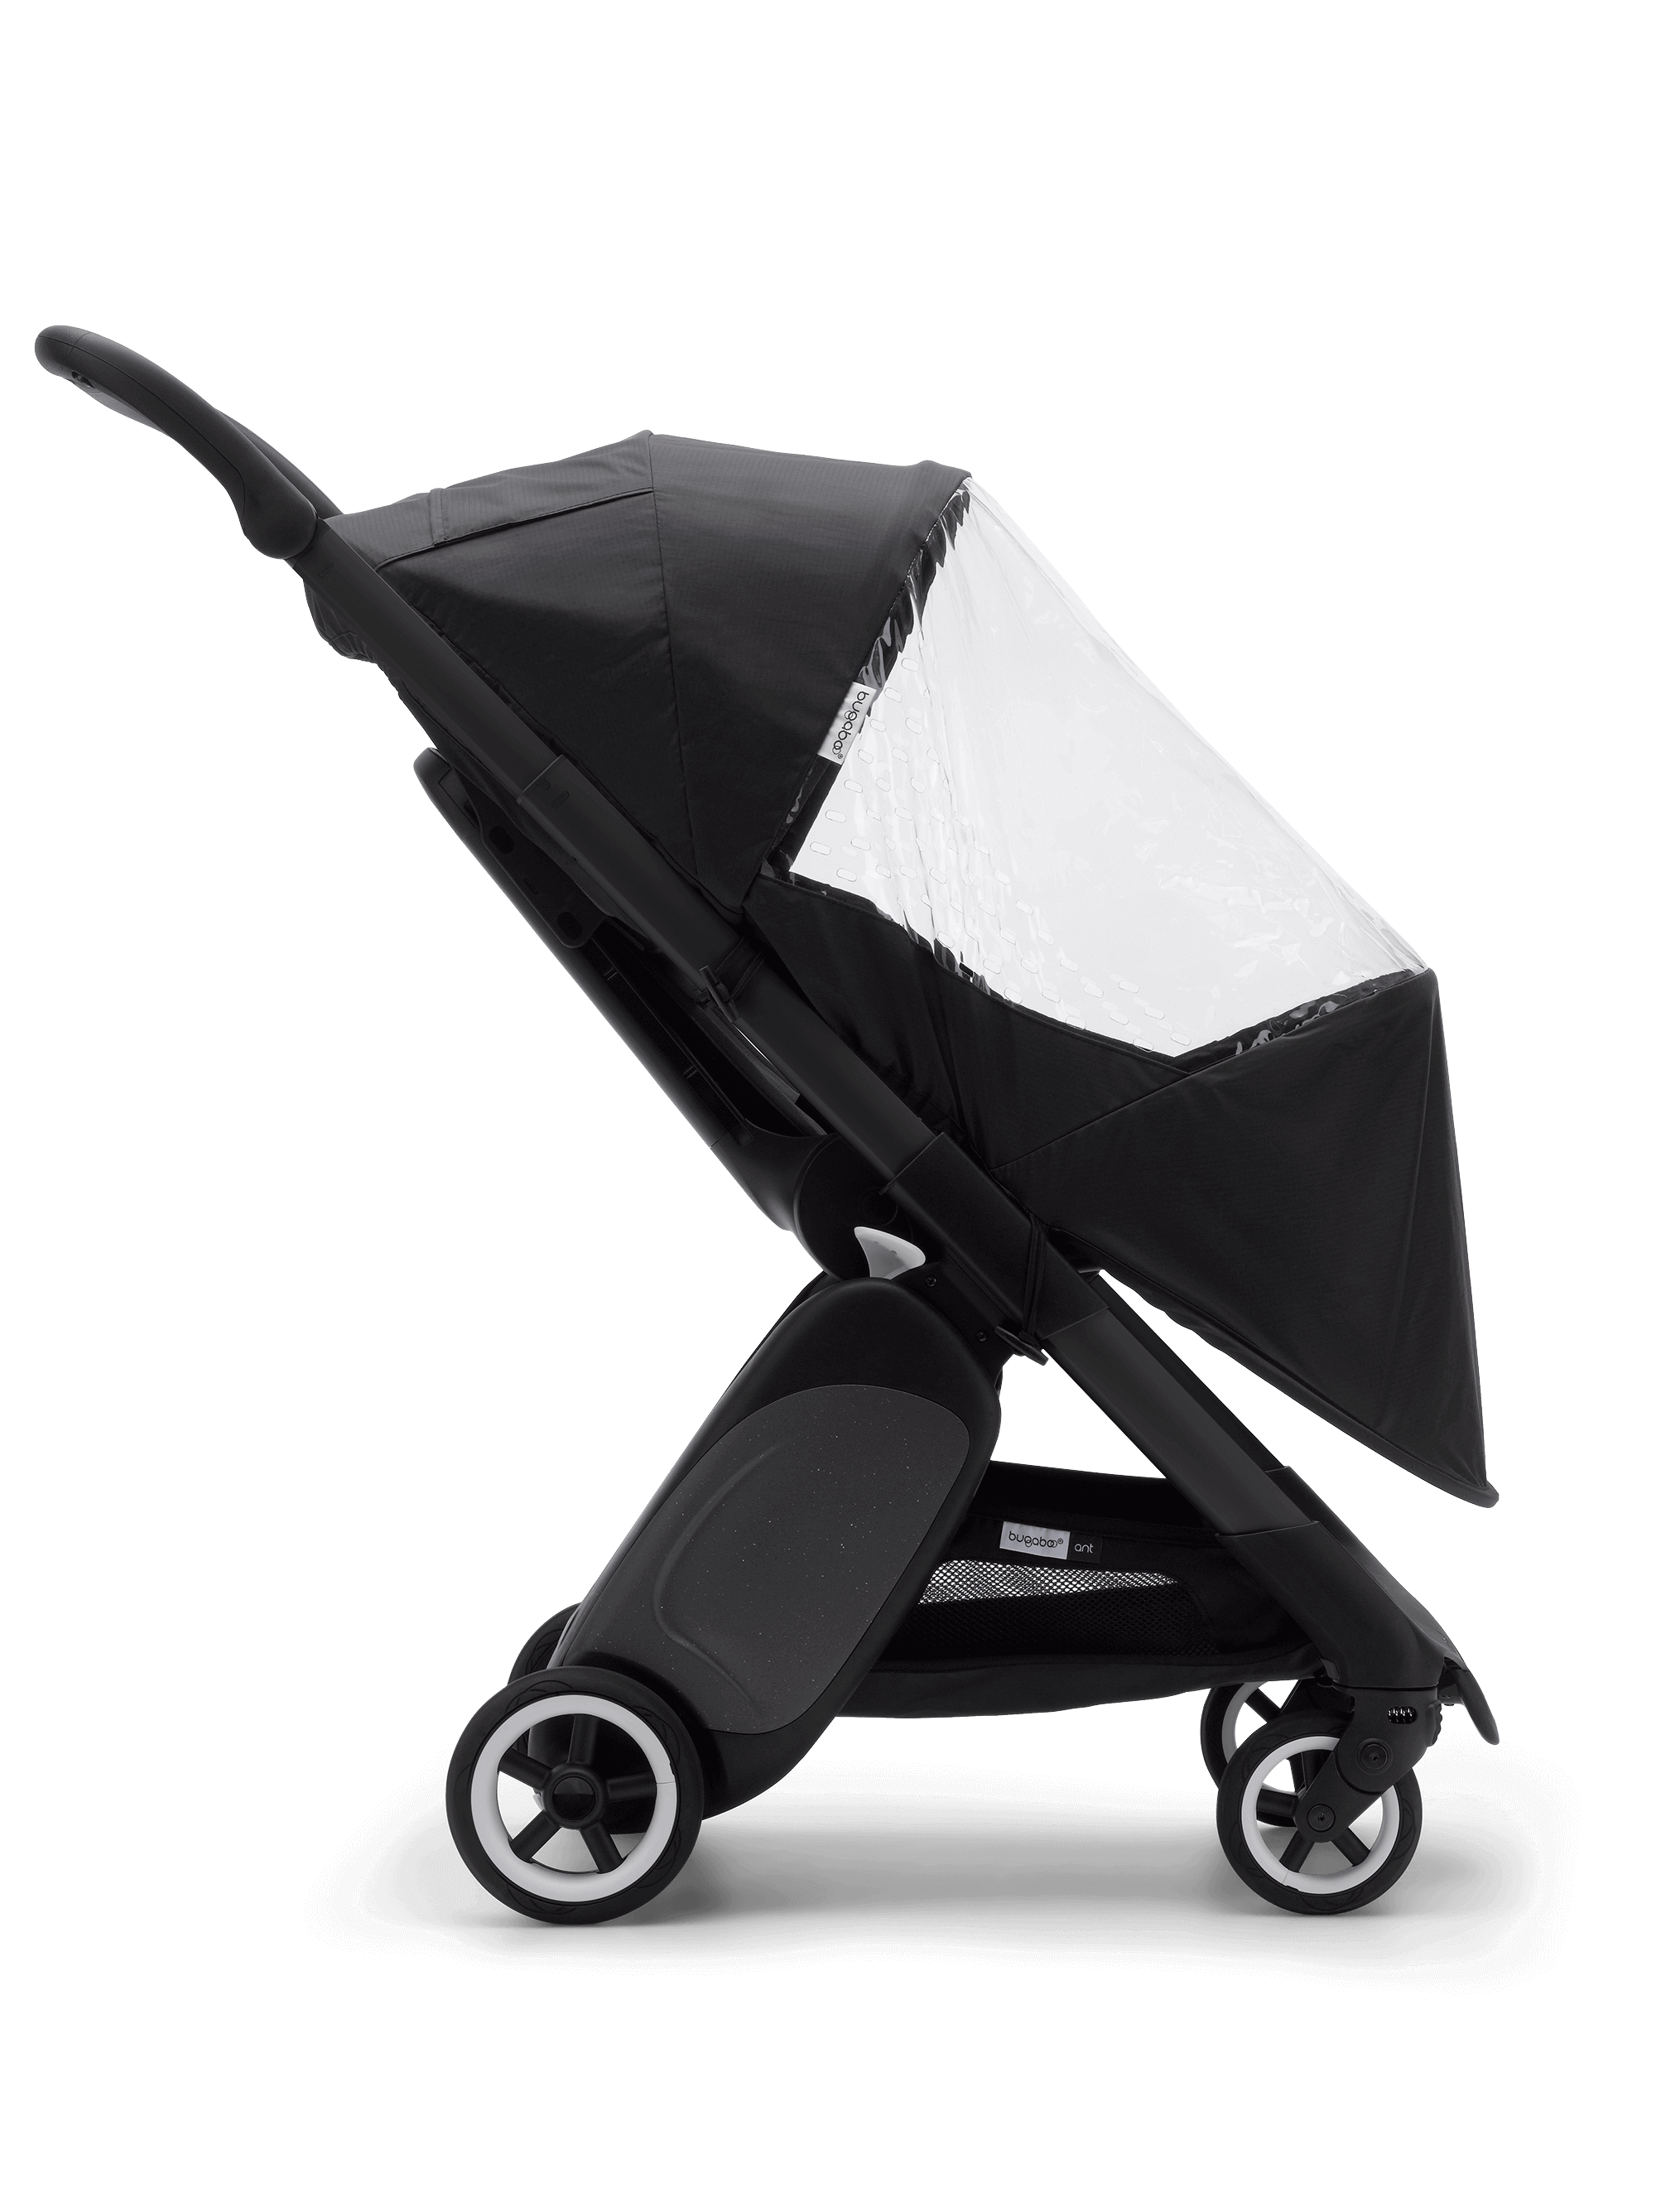 RAINCOVER by Koodee designed to fit BUGABOO BUFFALO SEAT UNIT Made in the UK 